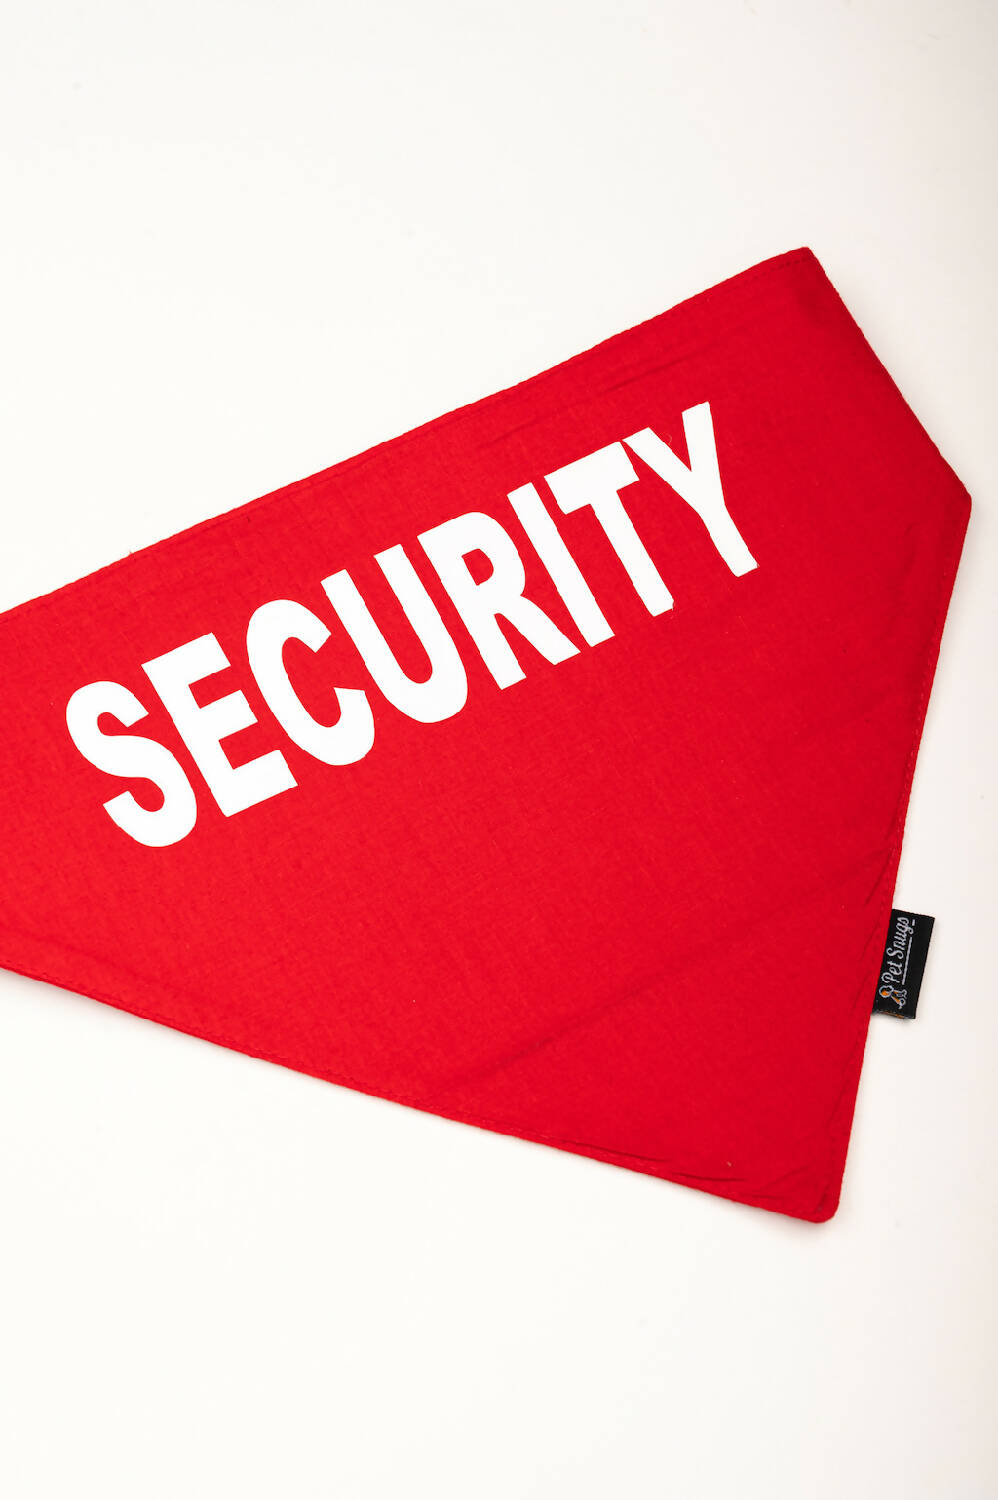 Petsnugs - Security Bandana- Bright Red for Dogs & Cats